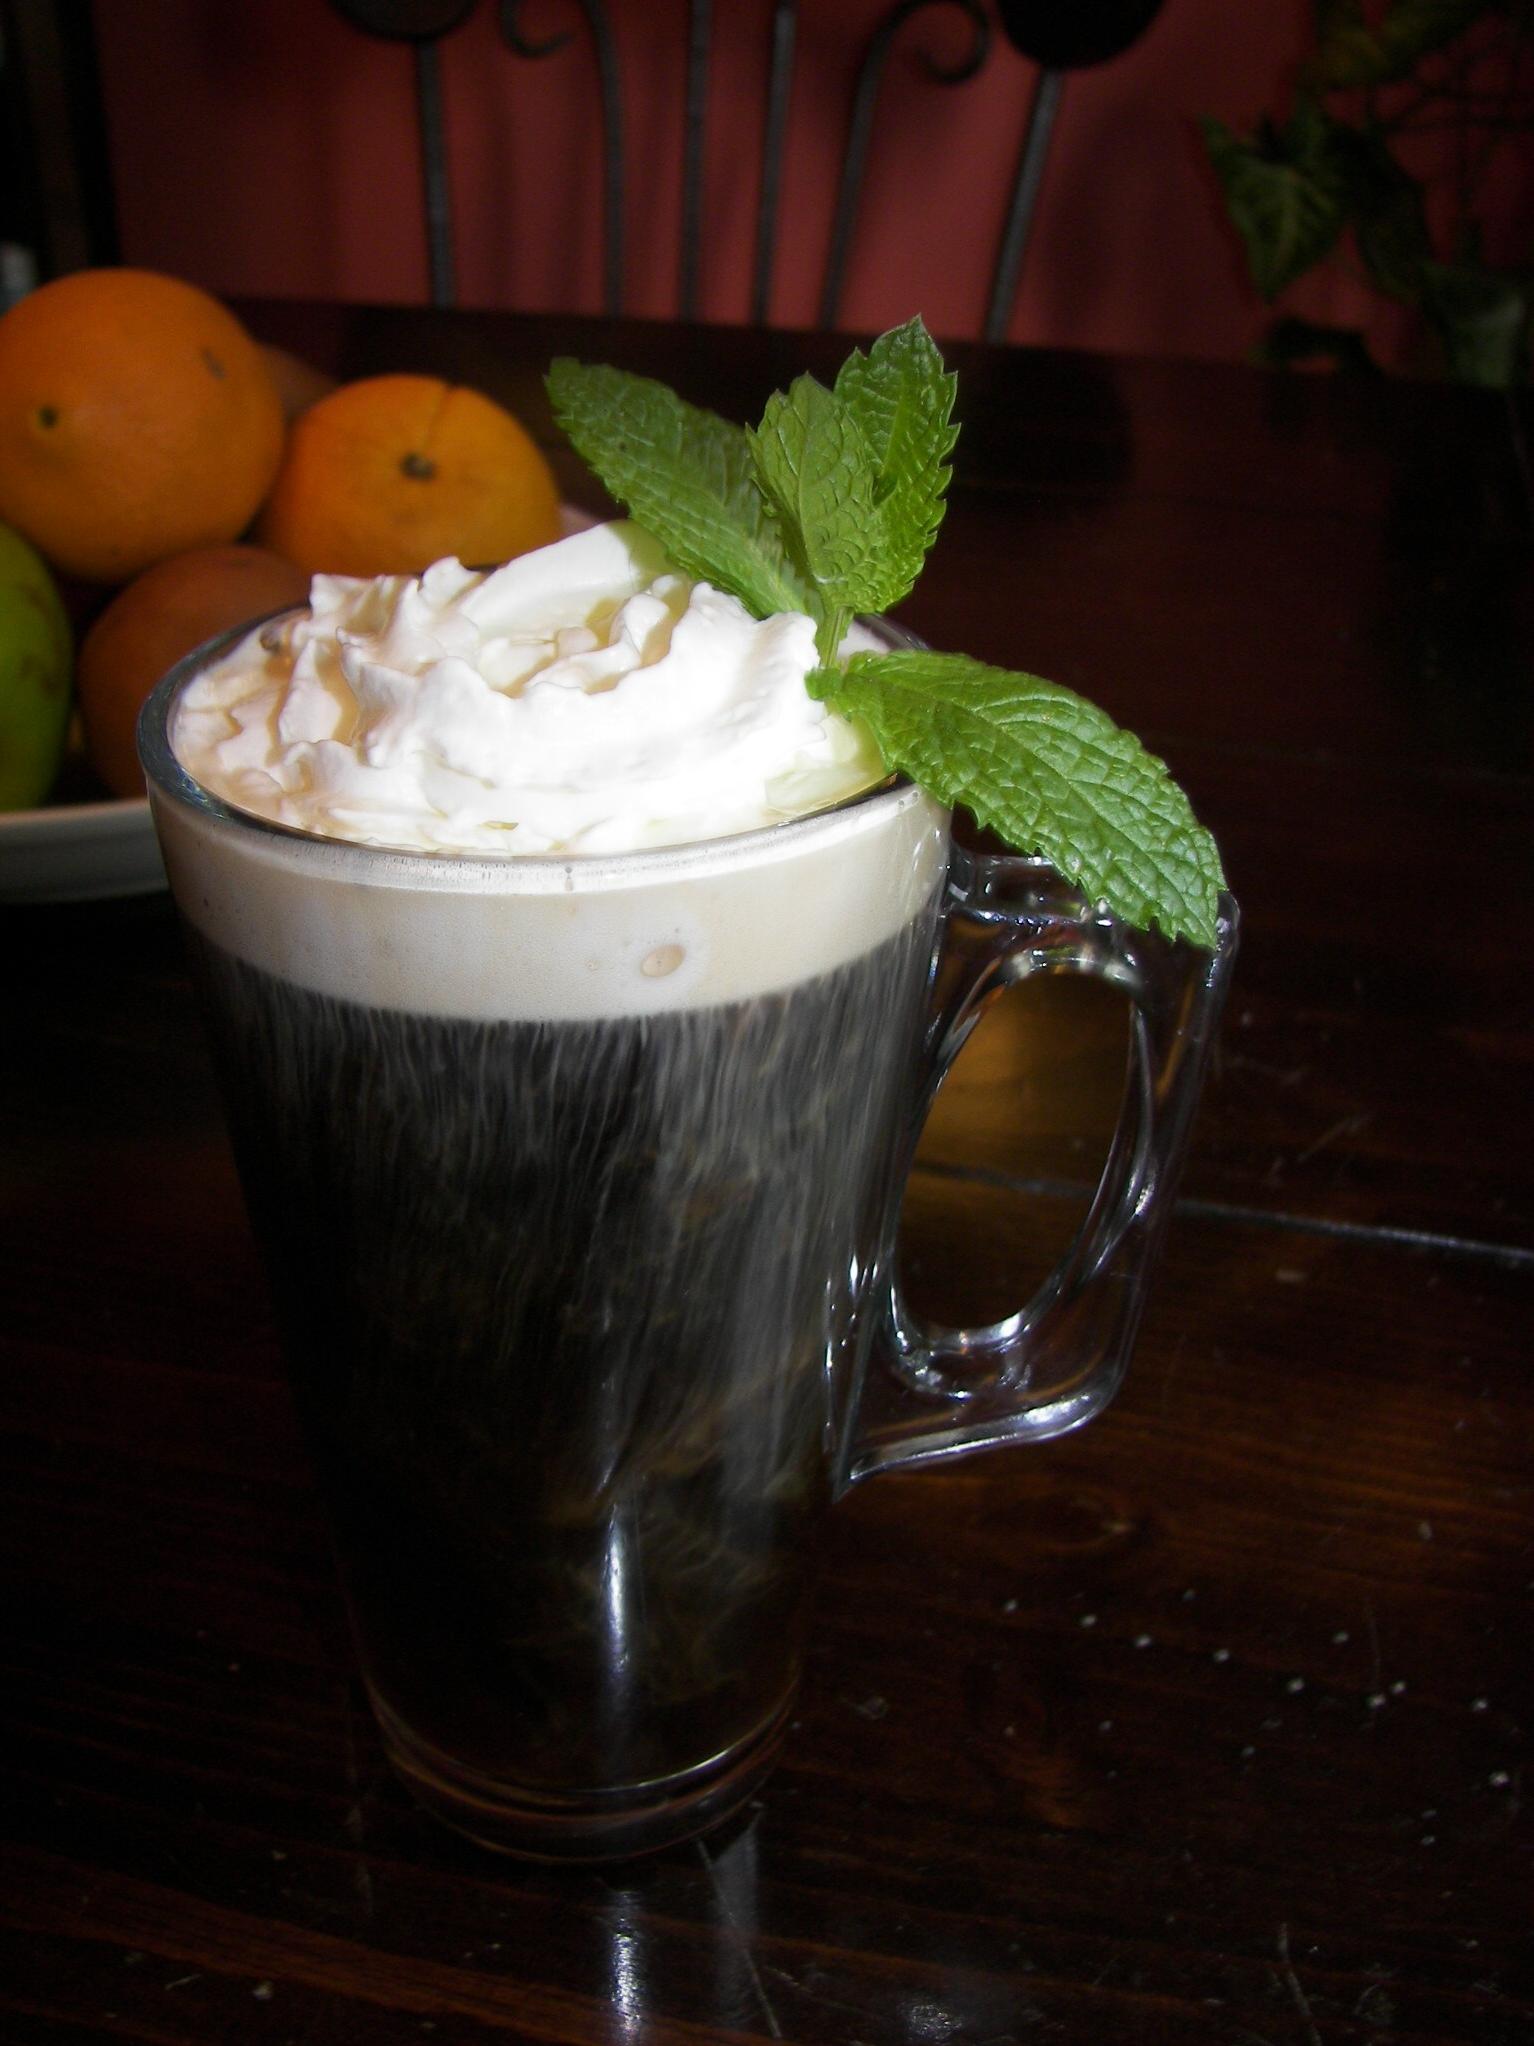 Minty Fresh: A Coffee and Mint Delight